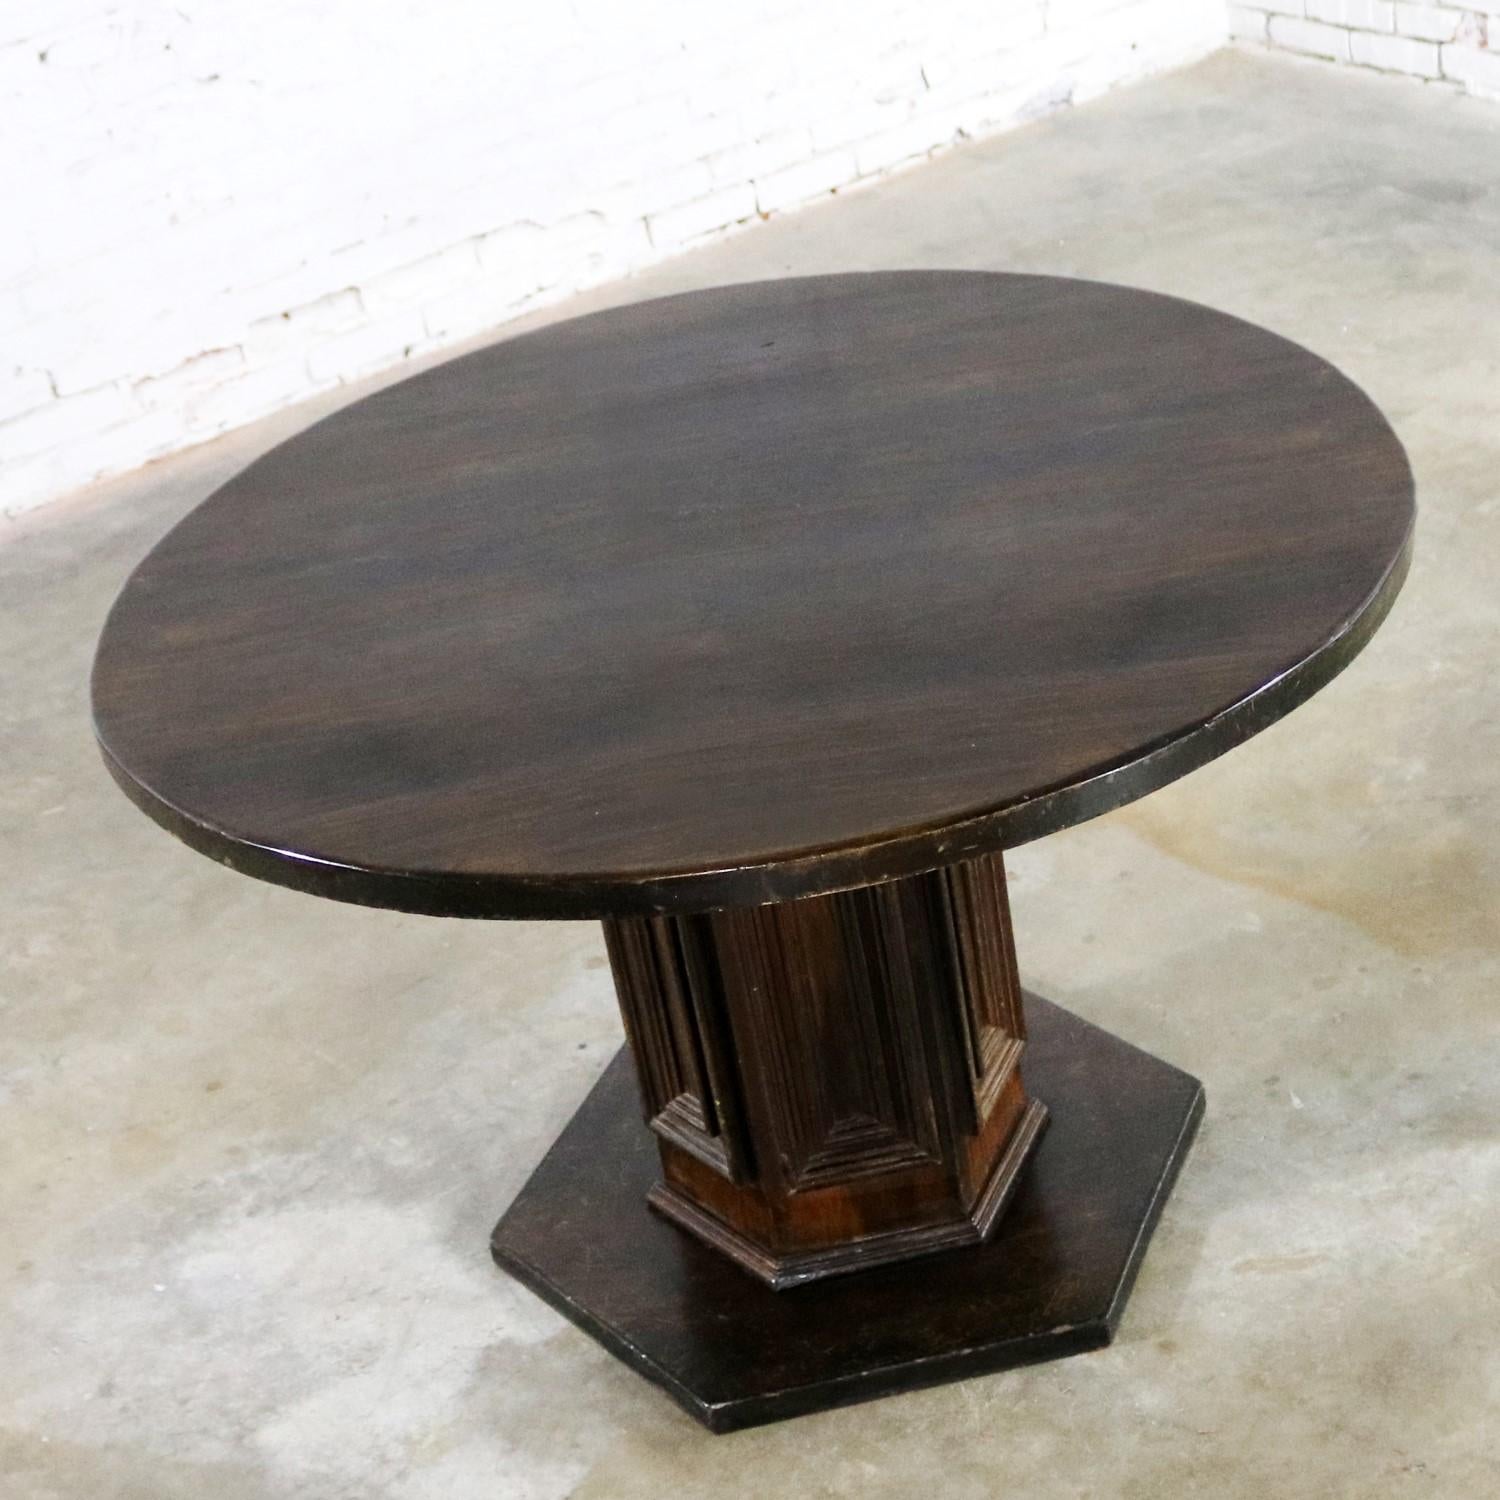 Handsome single pedestal round Spanish Colonial or Spanish Revival style dining table. In the style of and most likely by Artes De Mexico Internacionales, SA. There are two available but priced separately and they are both in wonderful vintage